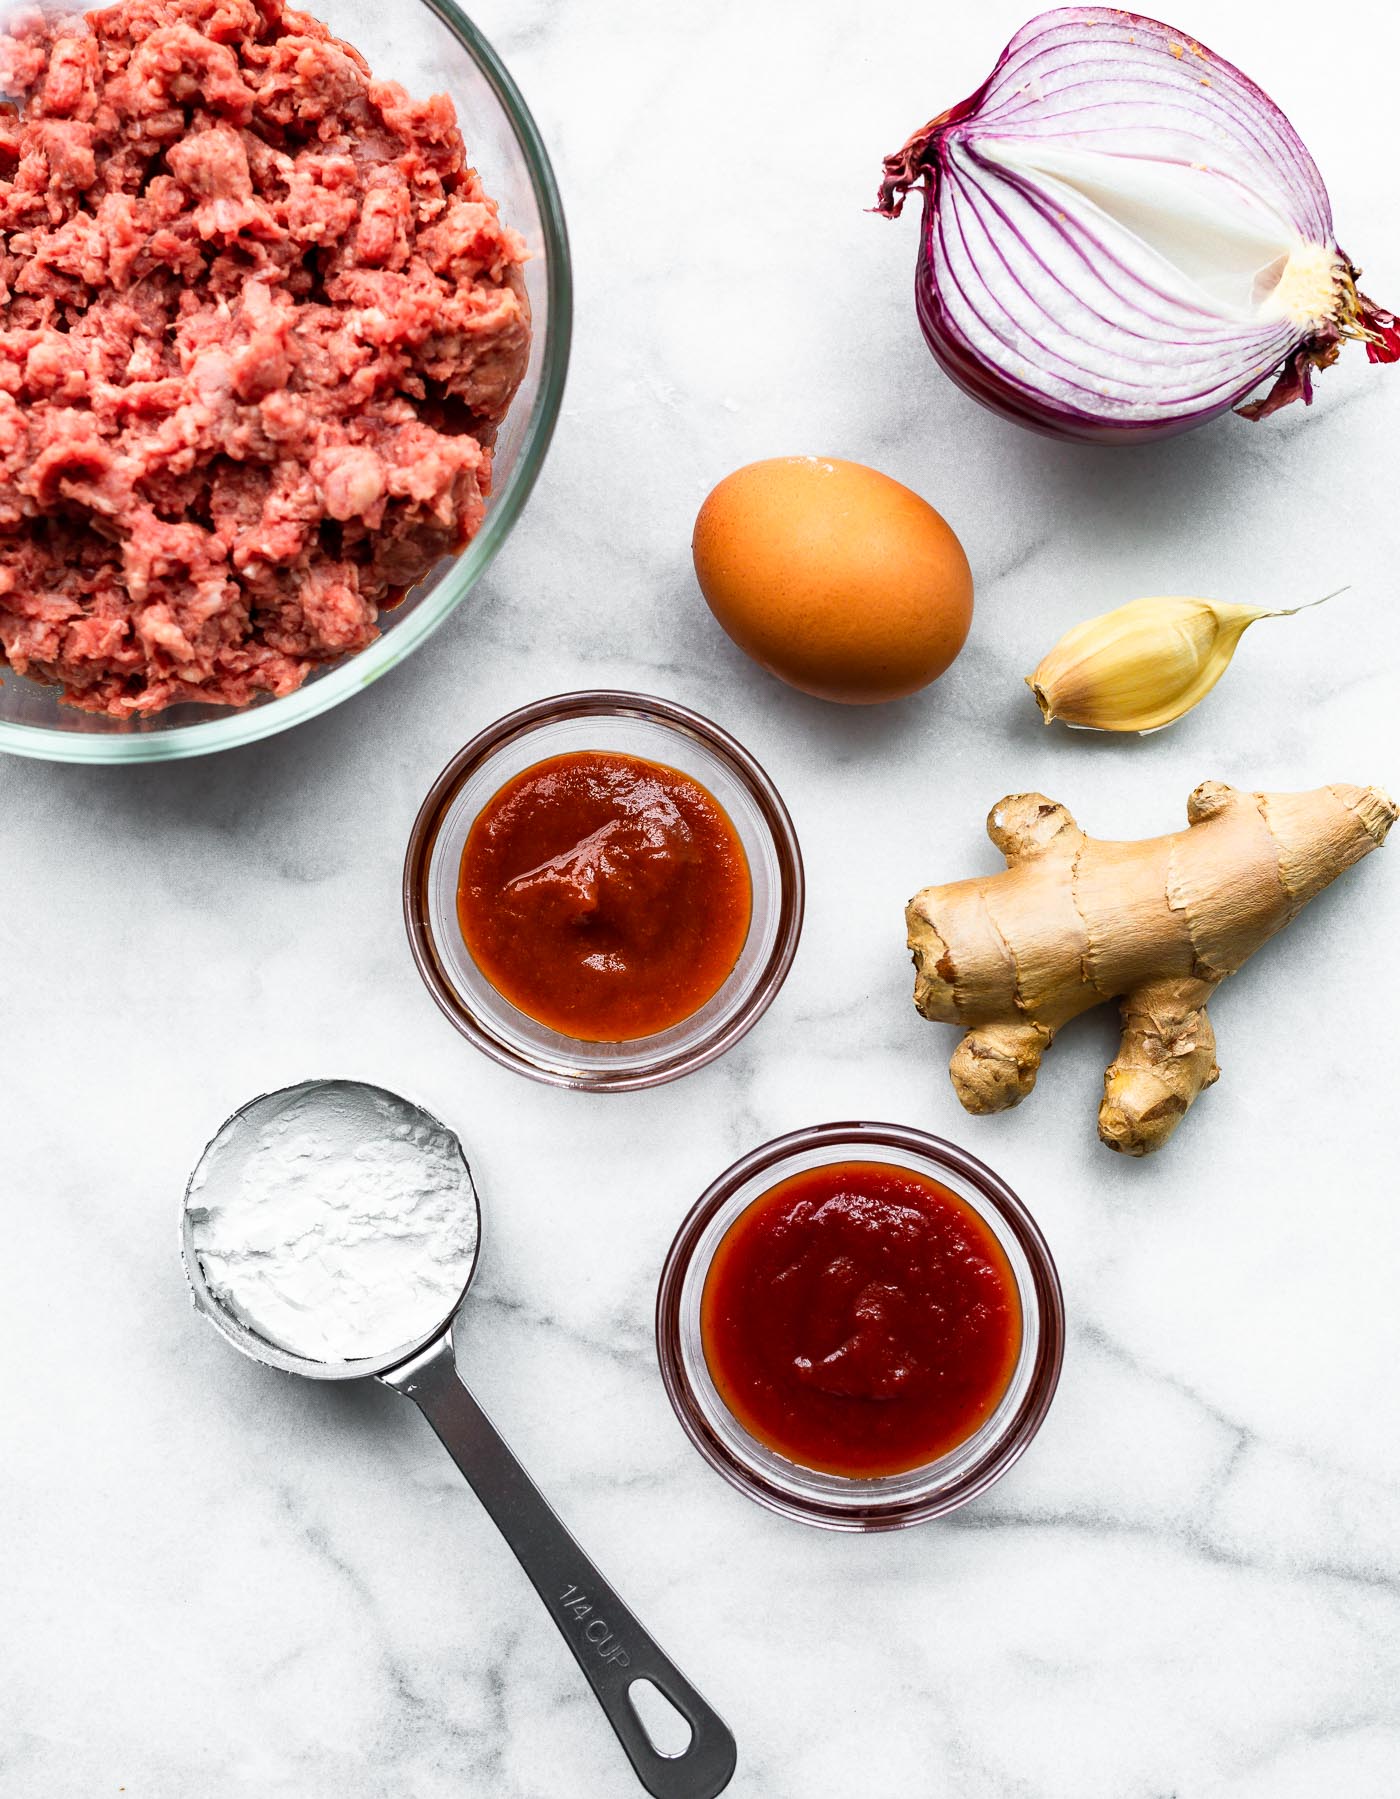 Overhead image of meatballs ingredients on a white tabletop.